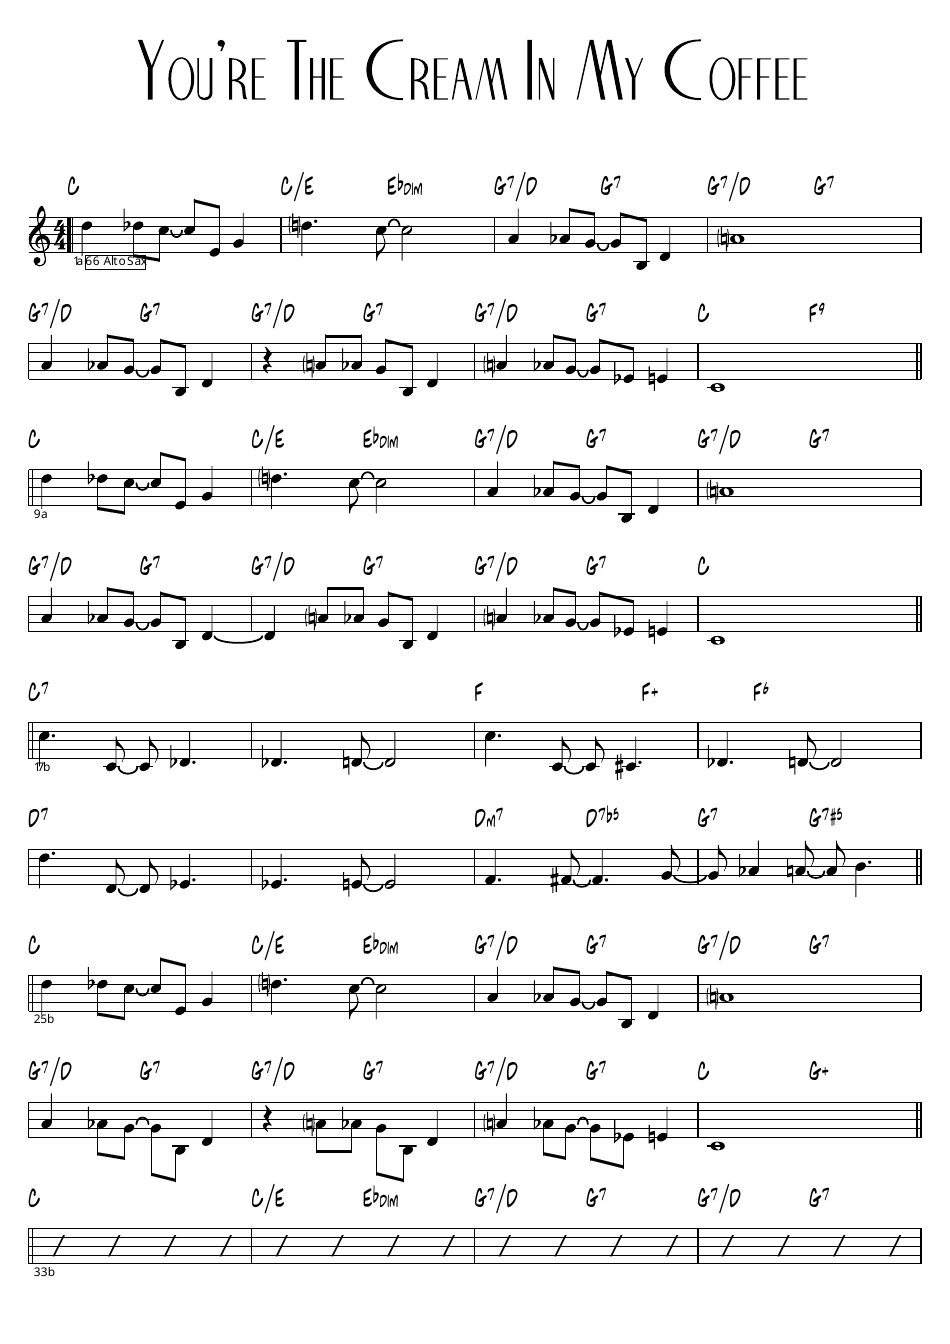 Sheet Music for the Song "You're the Cream in My Coffee